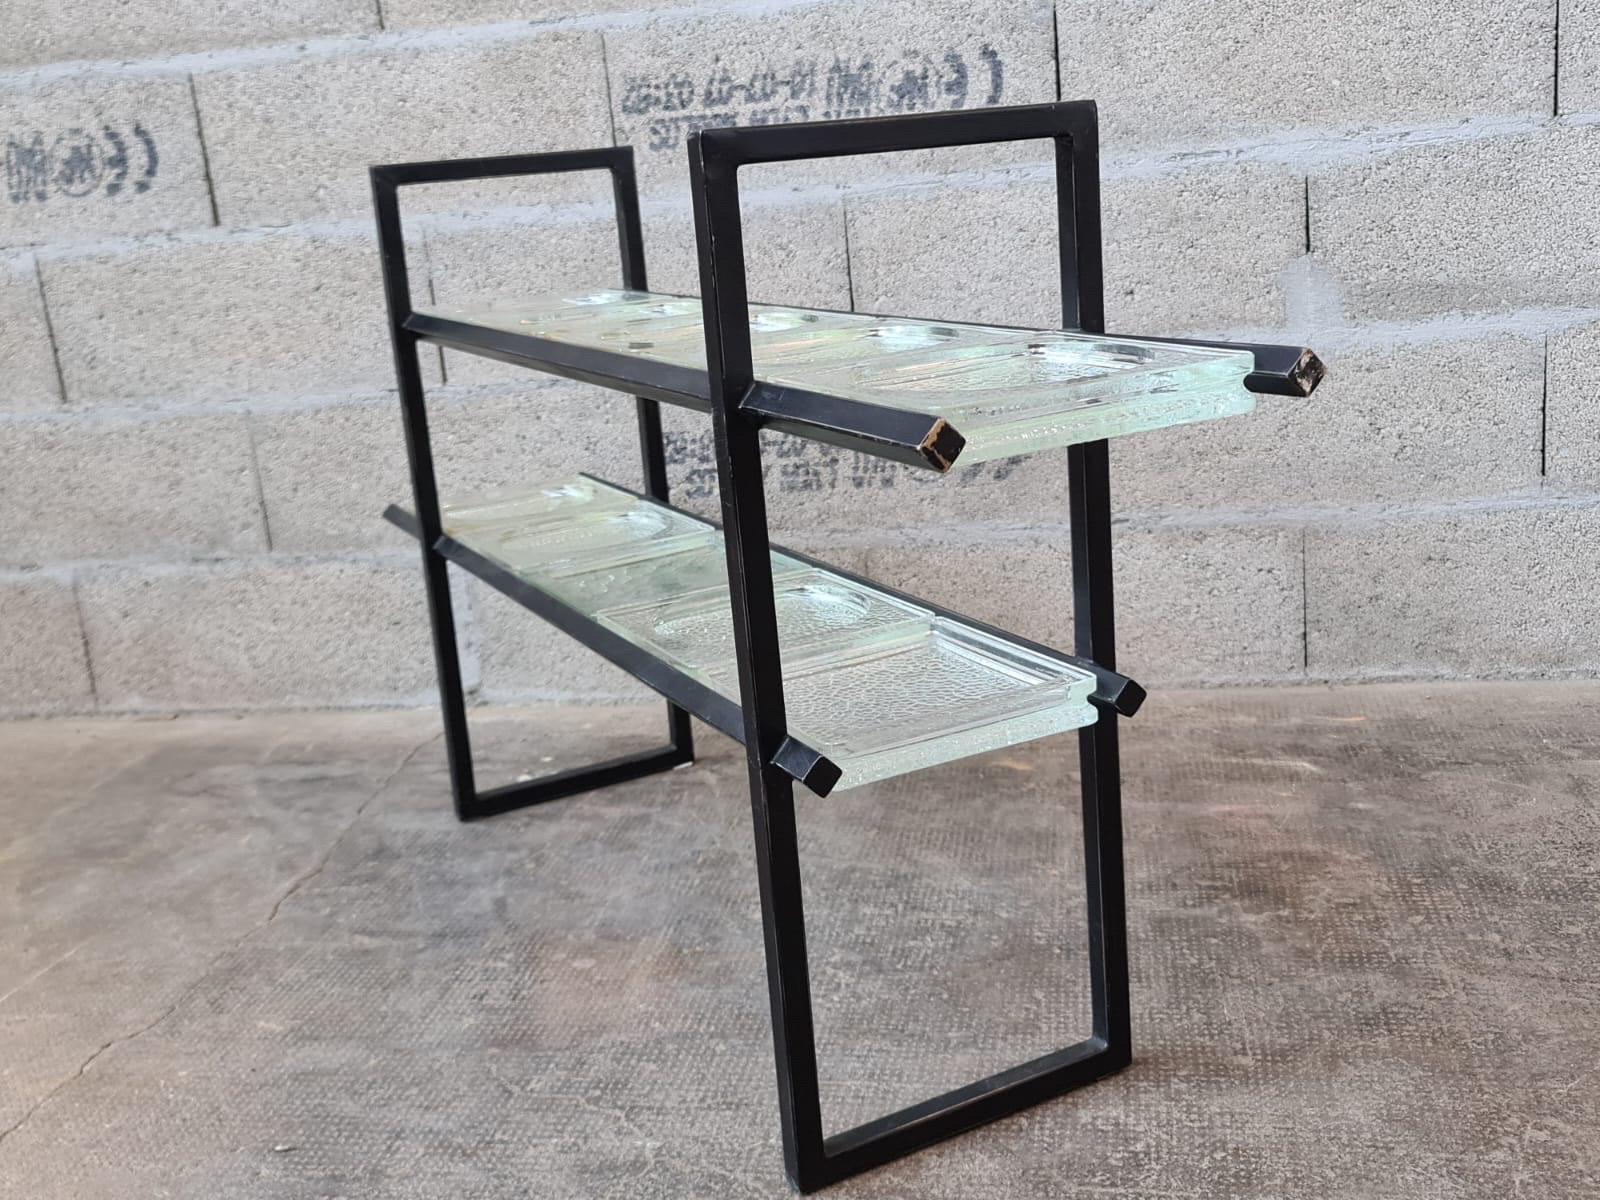 Shelve by Gustave Gautier (1911-1980) base in metal lacquered black the top is heavy glass ( probably saint gobain glass).